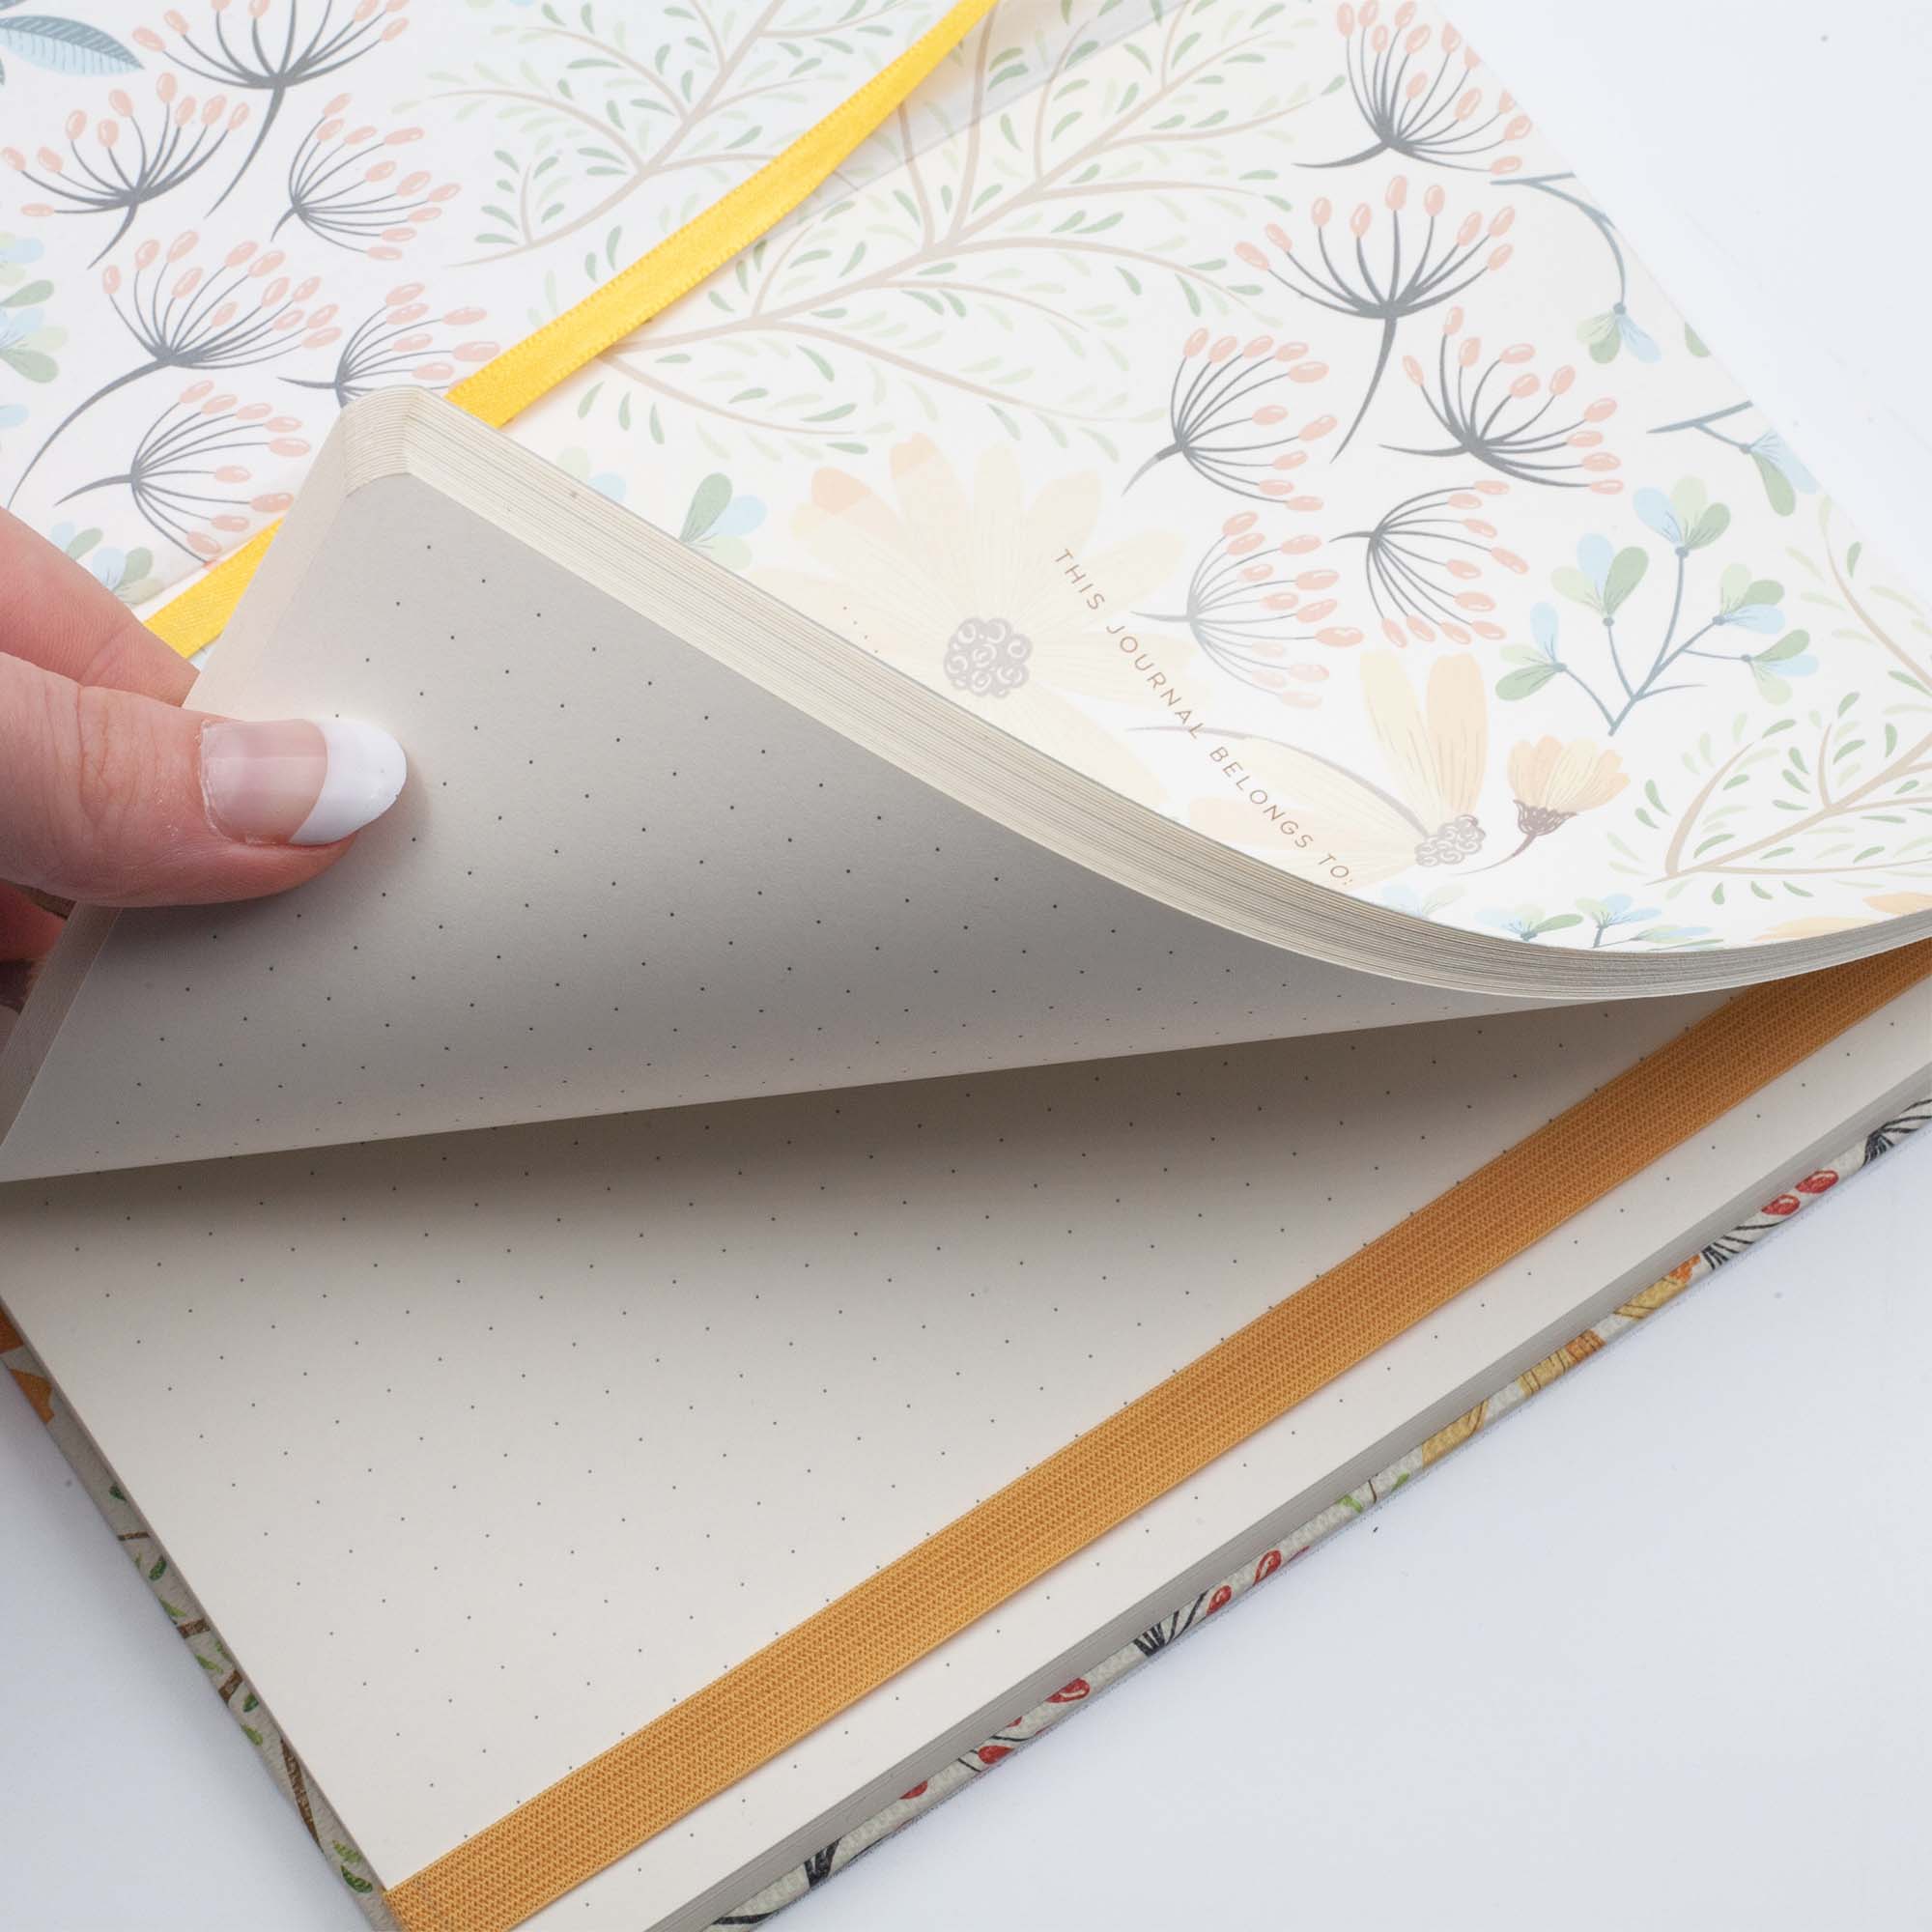 Image shows the endpaper and dotted pages of the Summer Premium journal